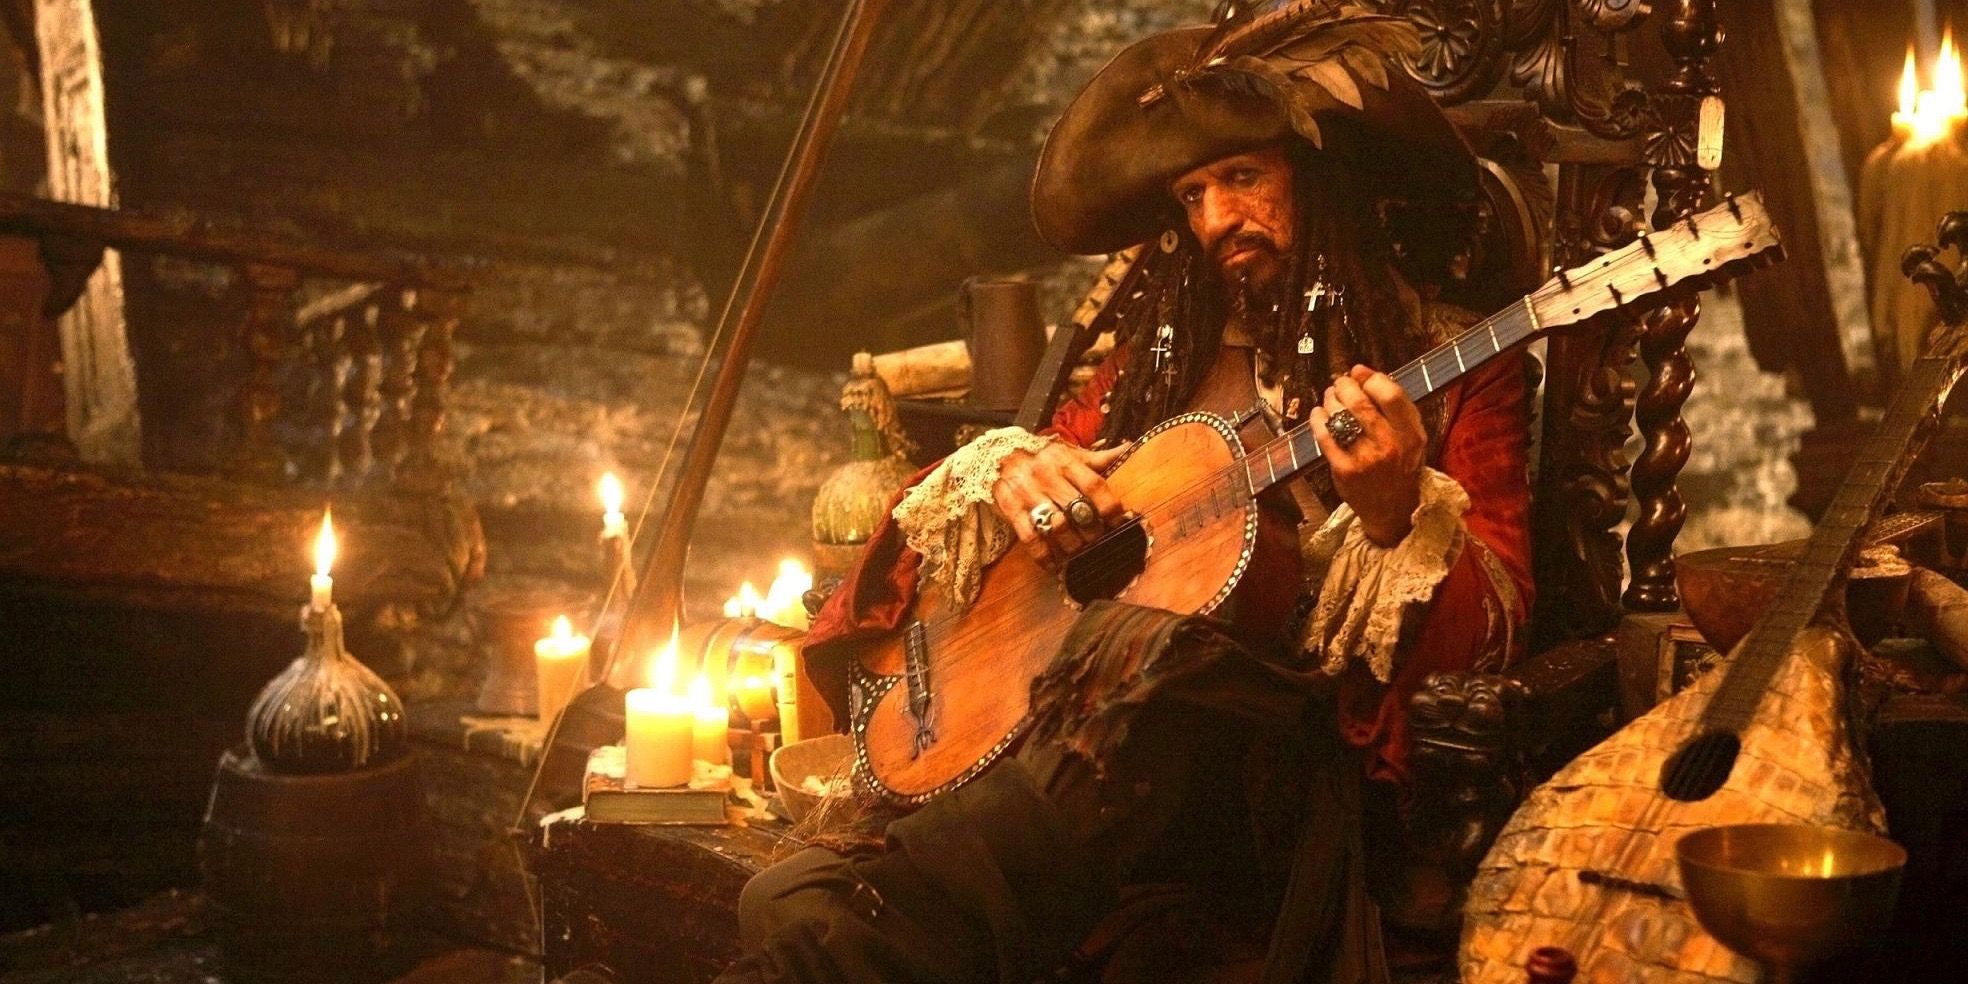 Pirates of the Caribbean Keith Richards